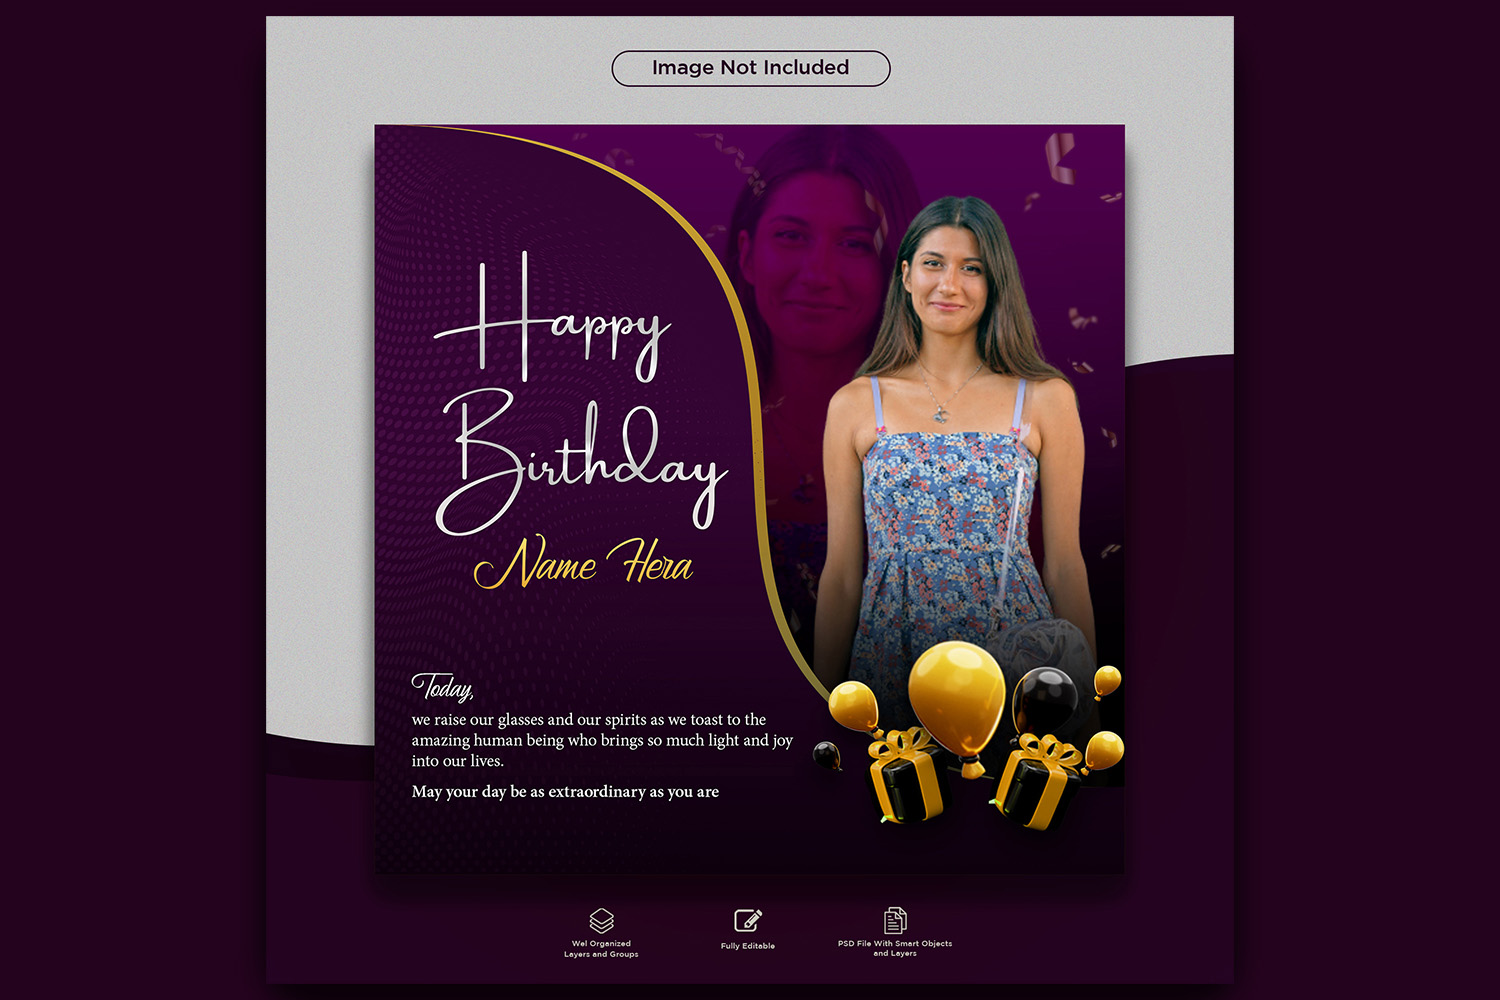 Happy birthday wish and celebration post design PSD template for social media pinterest preview image.